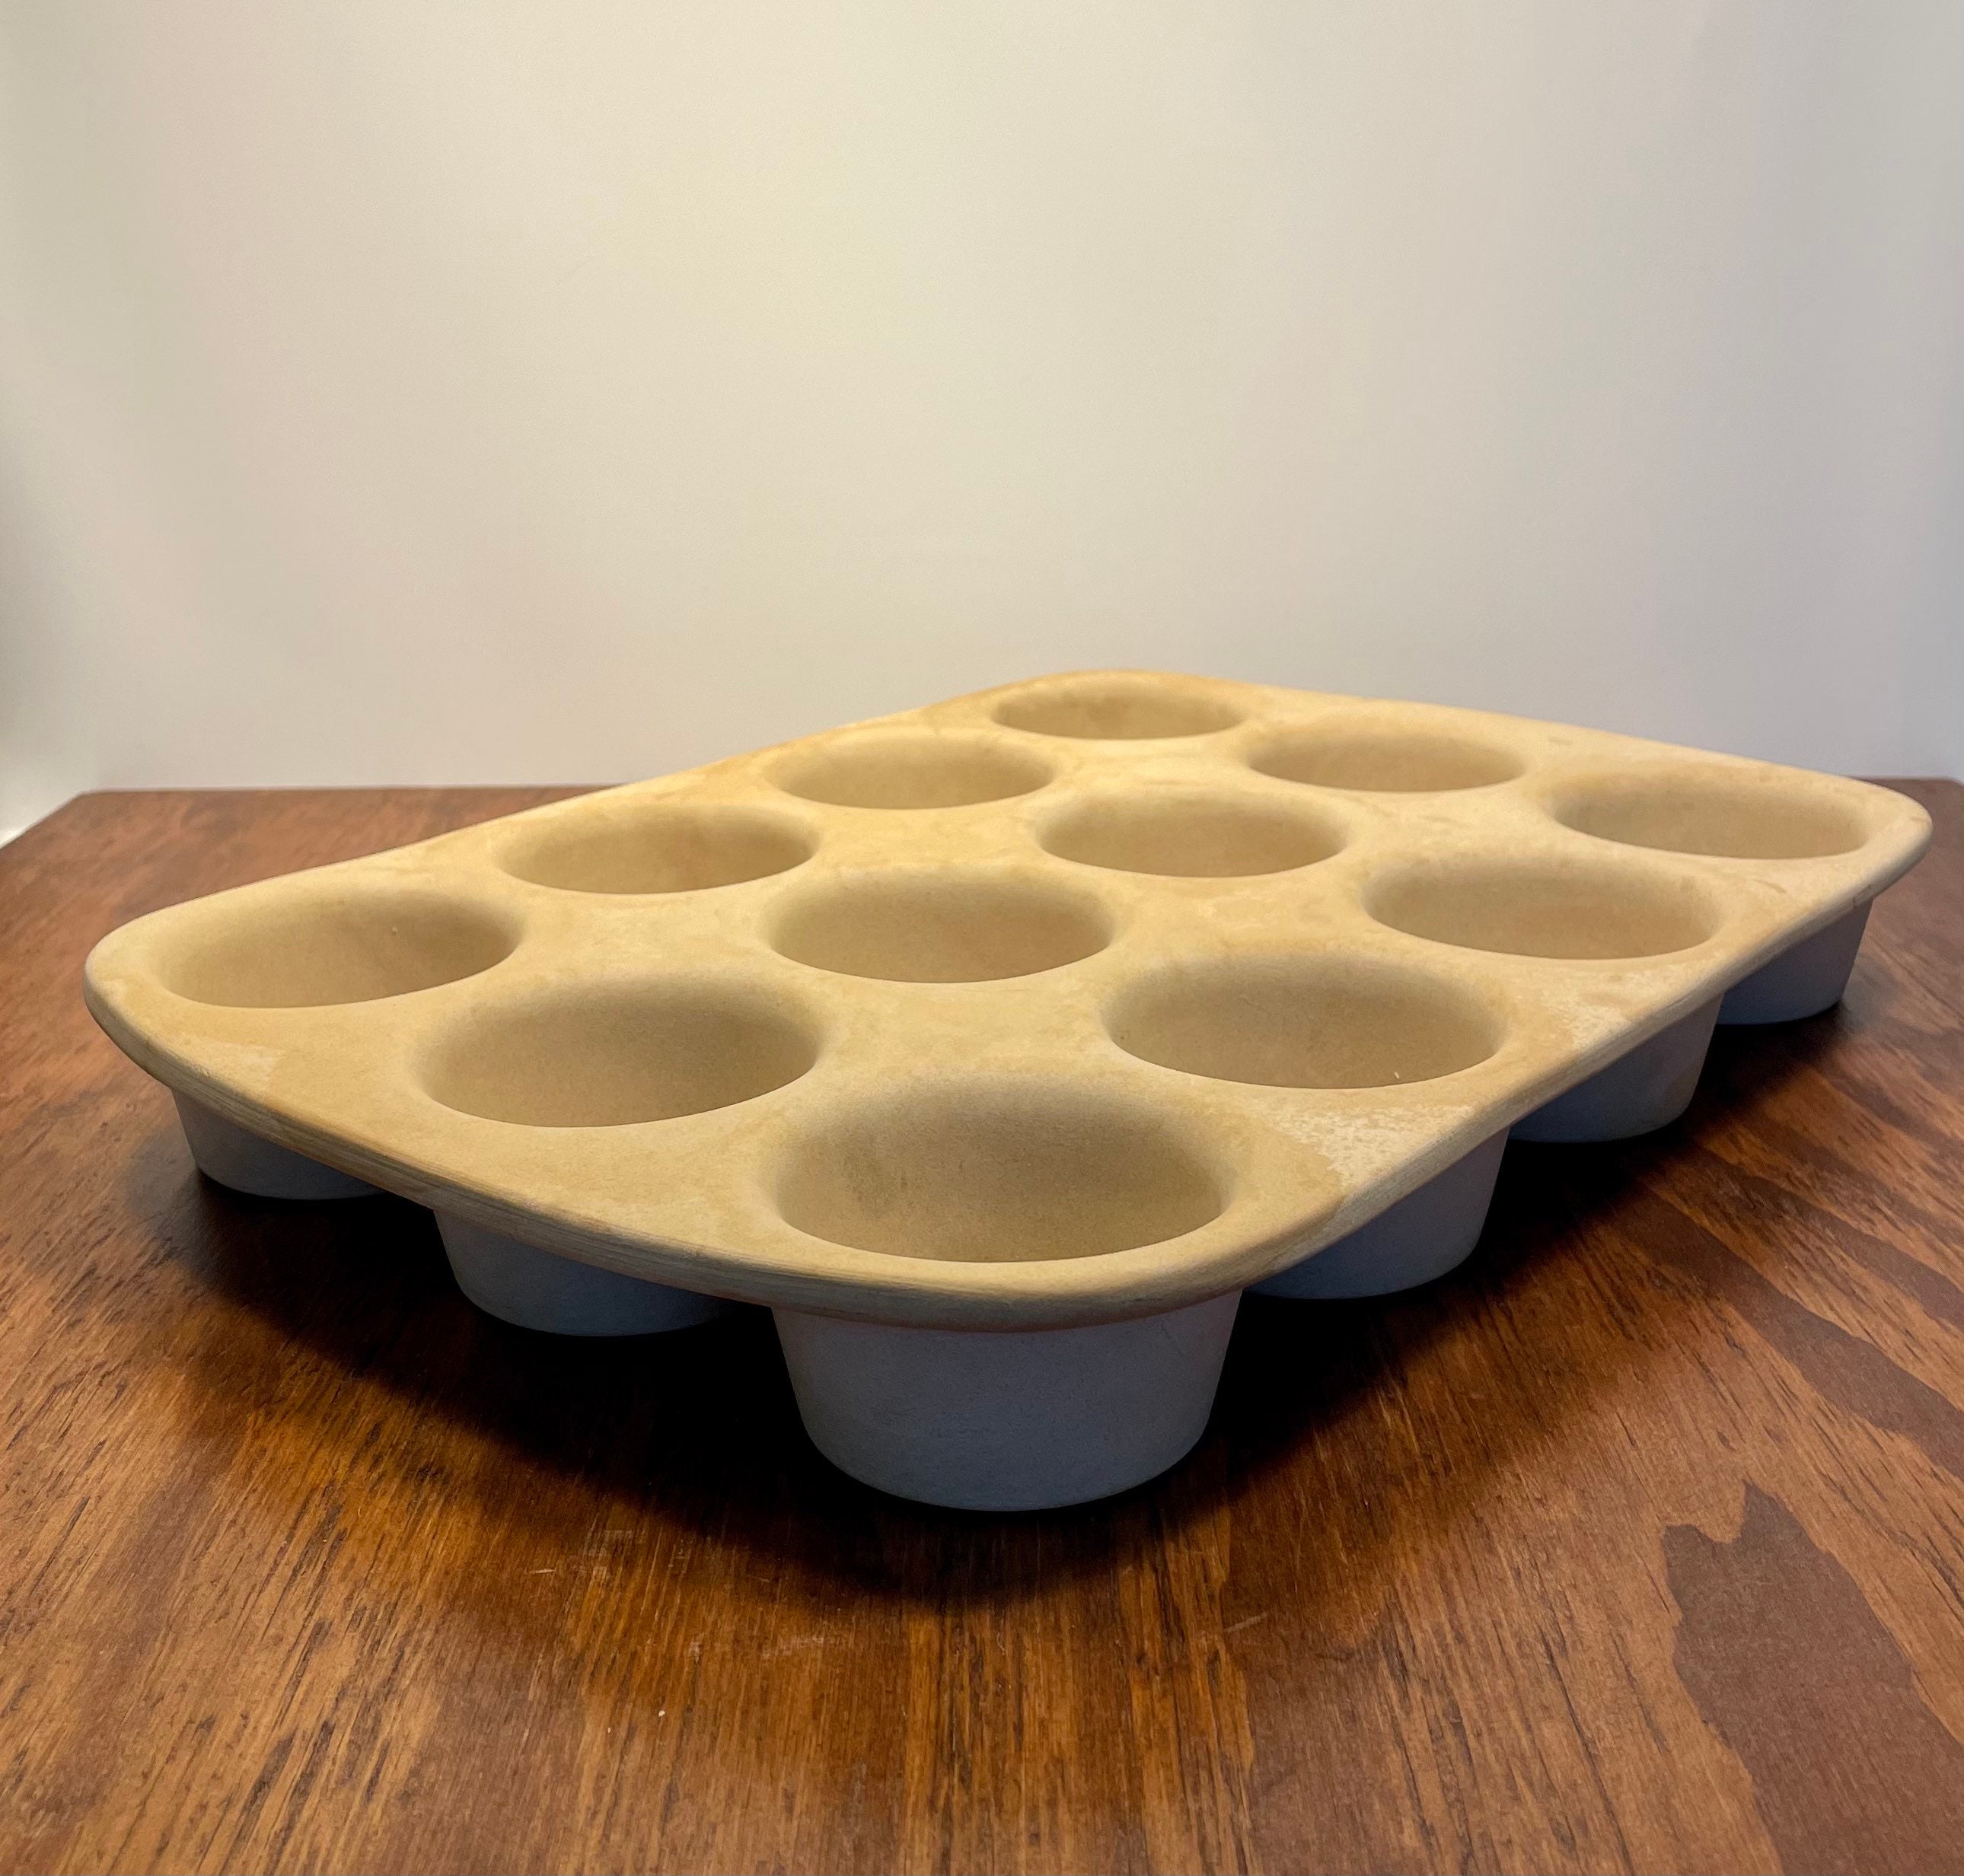 The Pampered Chef, Kitchen, The Pampered Chef Stoneware Muffin Pan